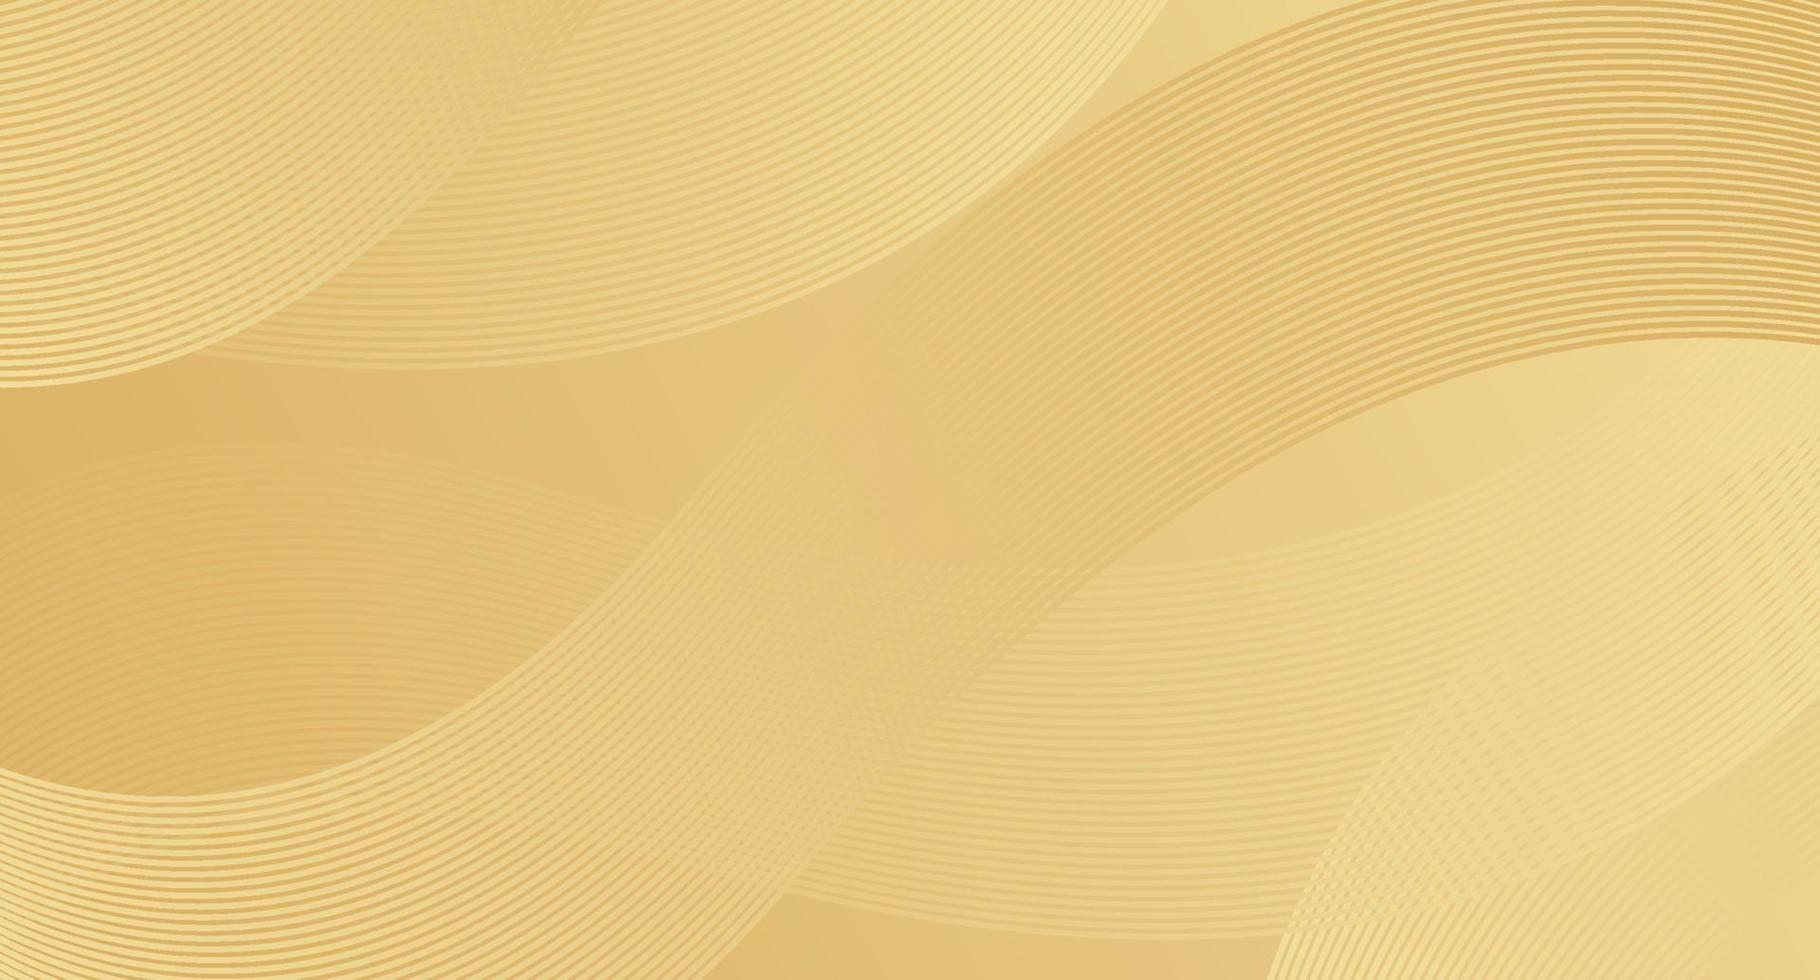 Abstract gold vector background with stripes. Abstract gold gradient background. Shiny gold texture. Vector illustration